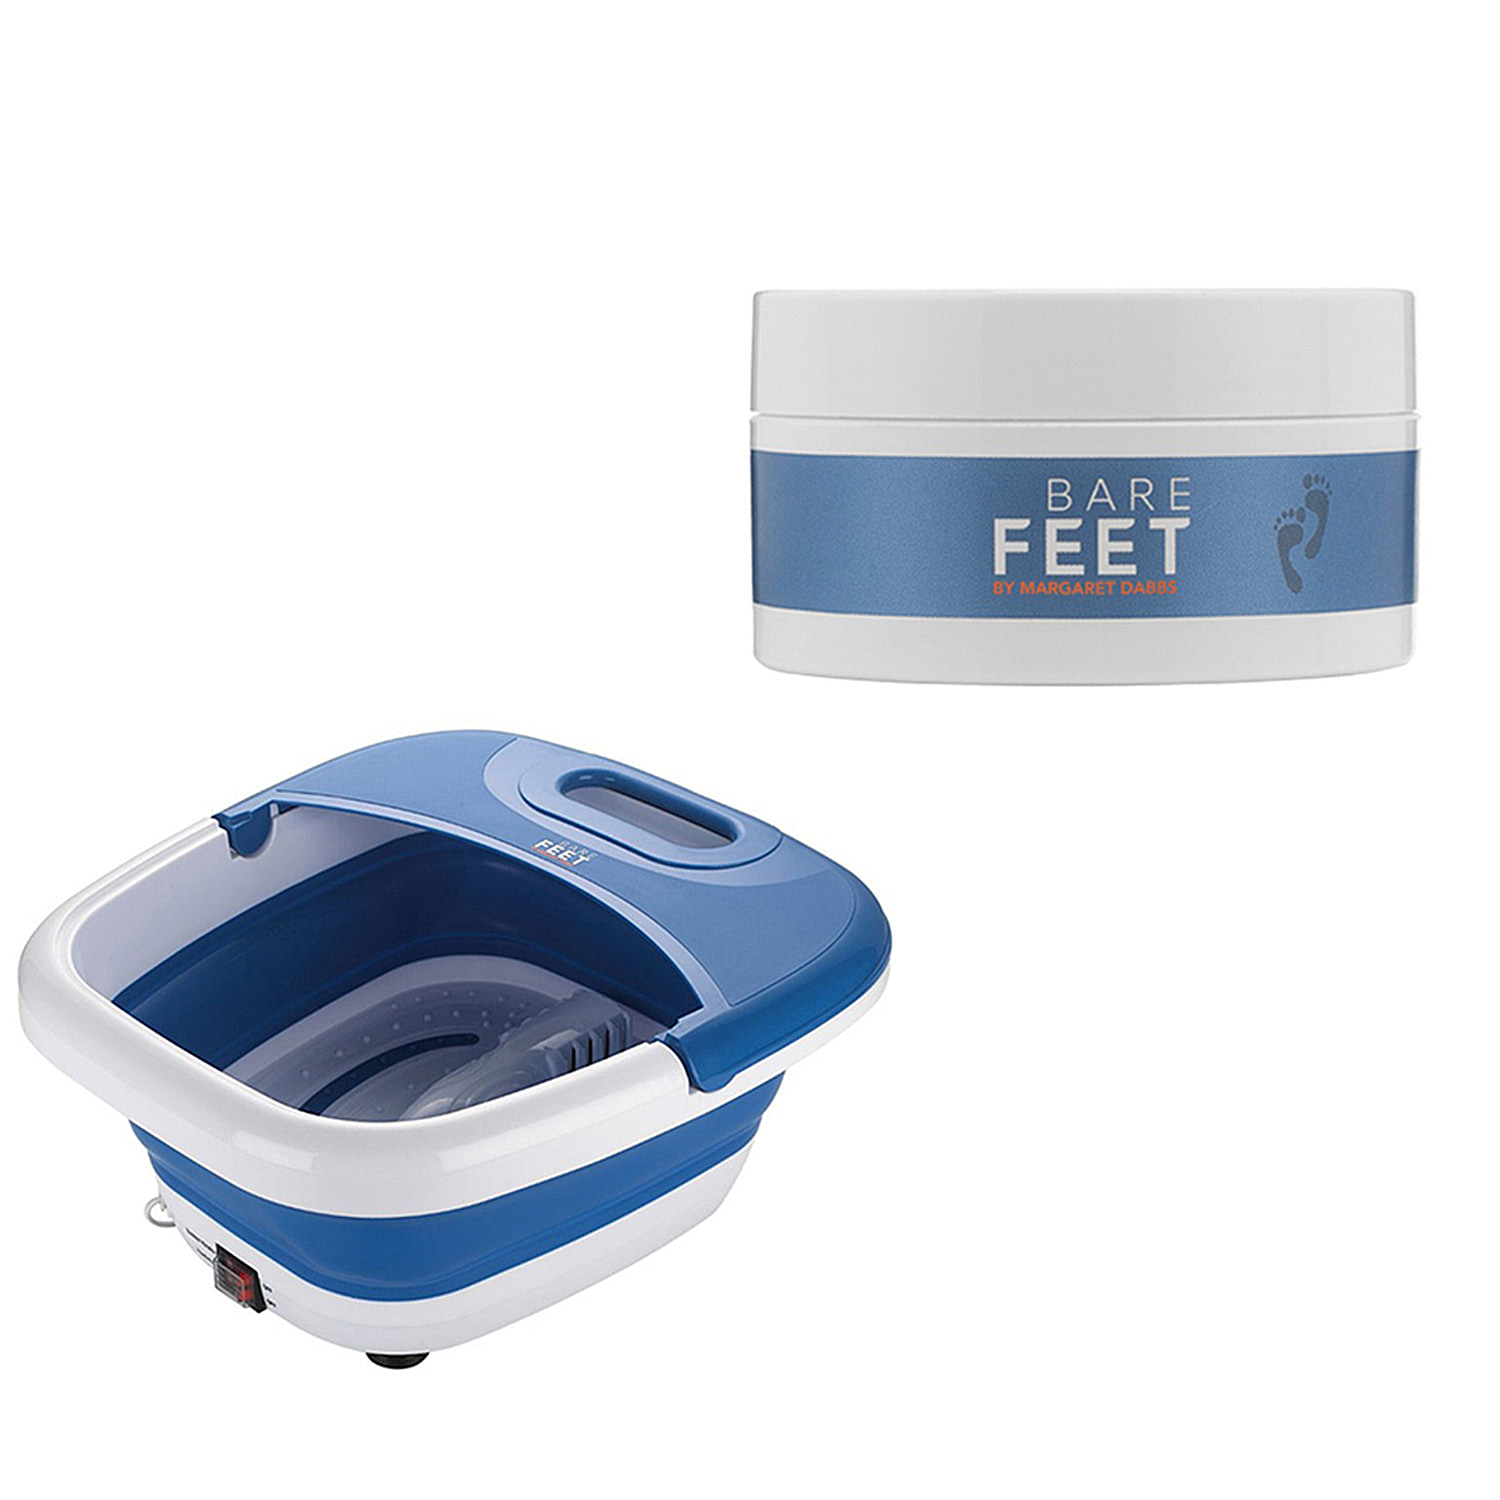 Jingle-Belle-Beauty-Event-Bare-Feet-Launch-Foot-Spa-and-Cracked-Heel-B